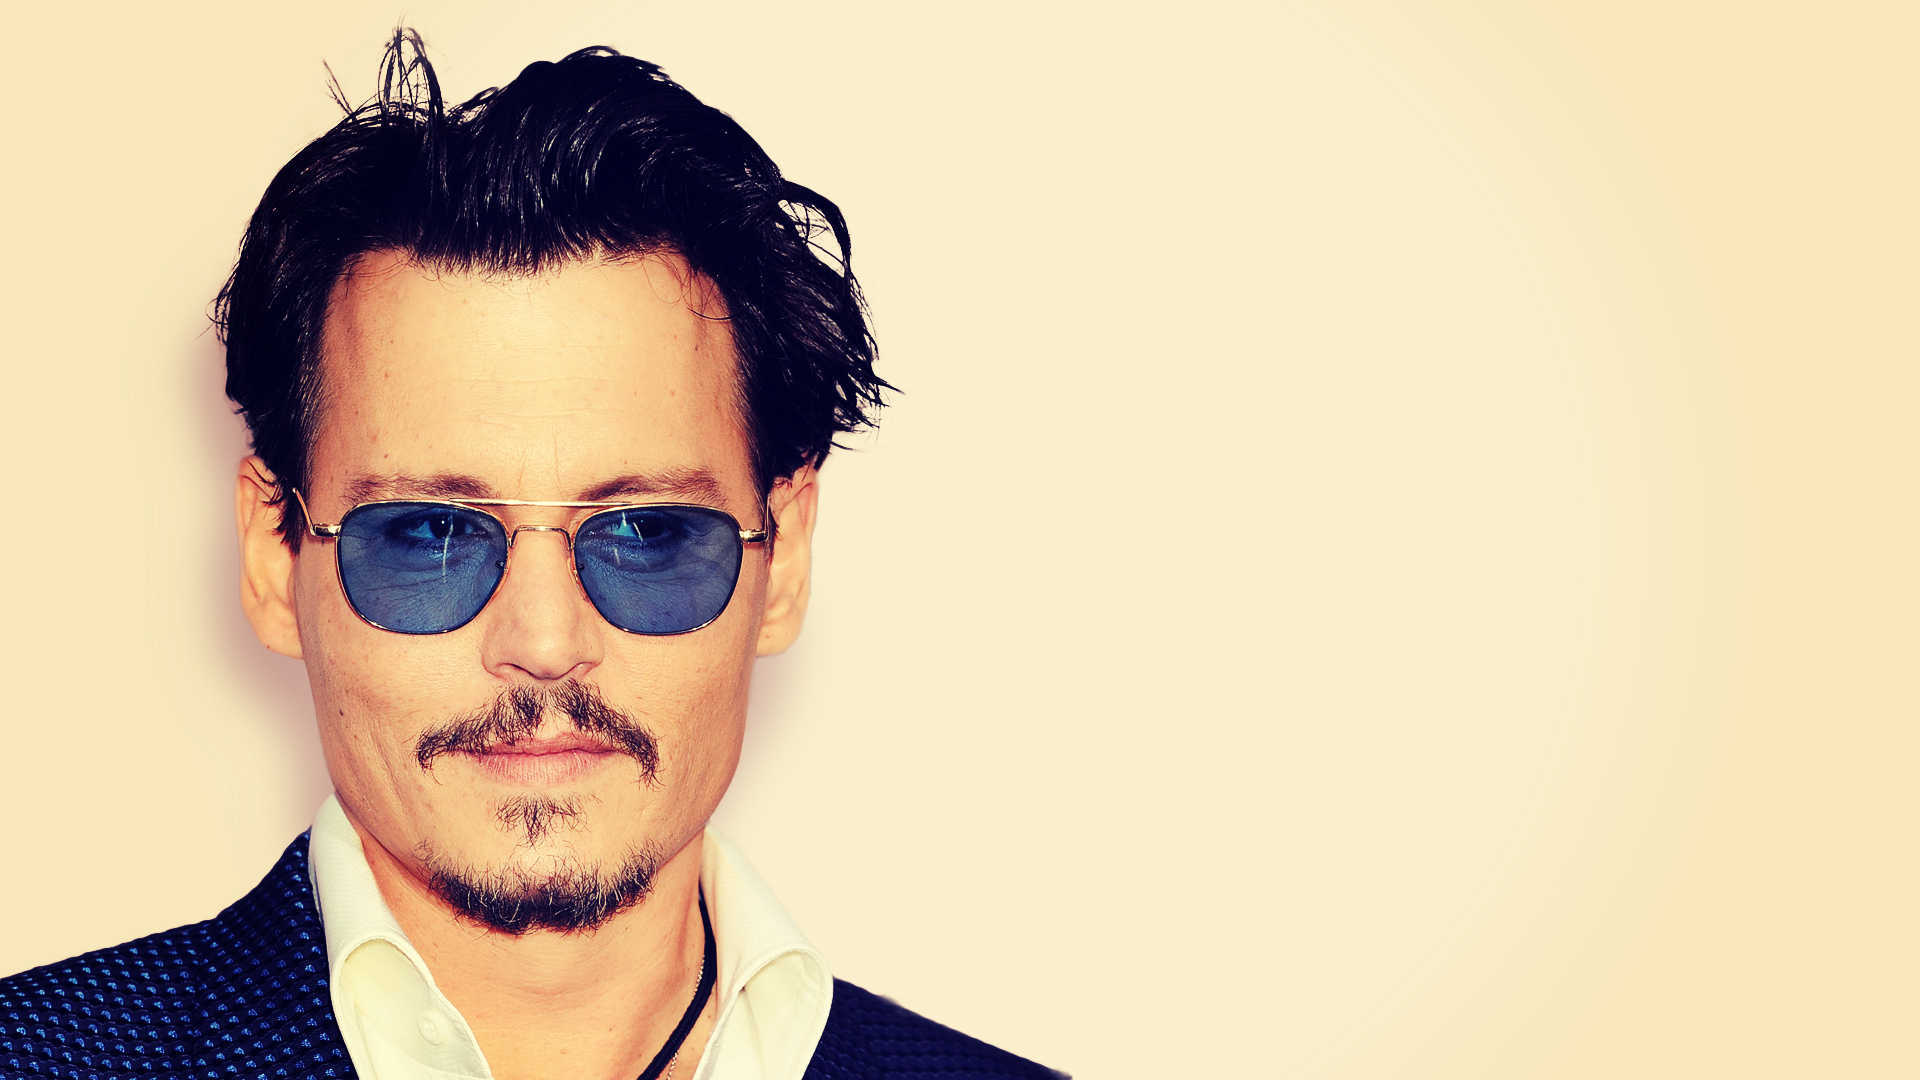 Johnny Depp HD Wallpaper ImgHD Browse And Image